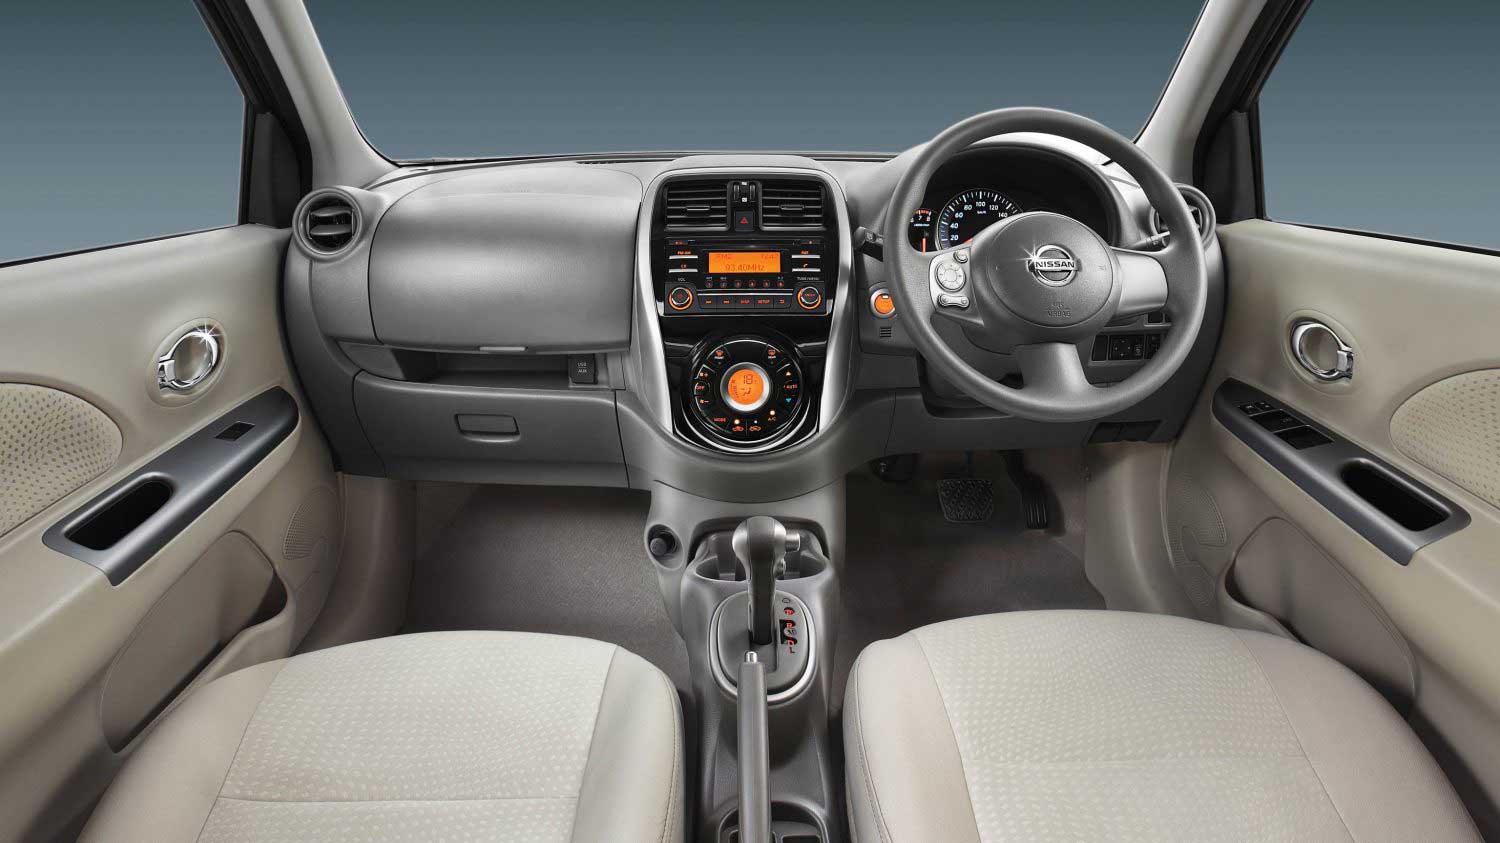 Nissan Micra XE Diesel Interior front view